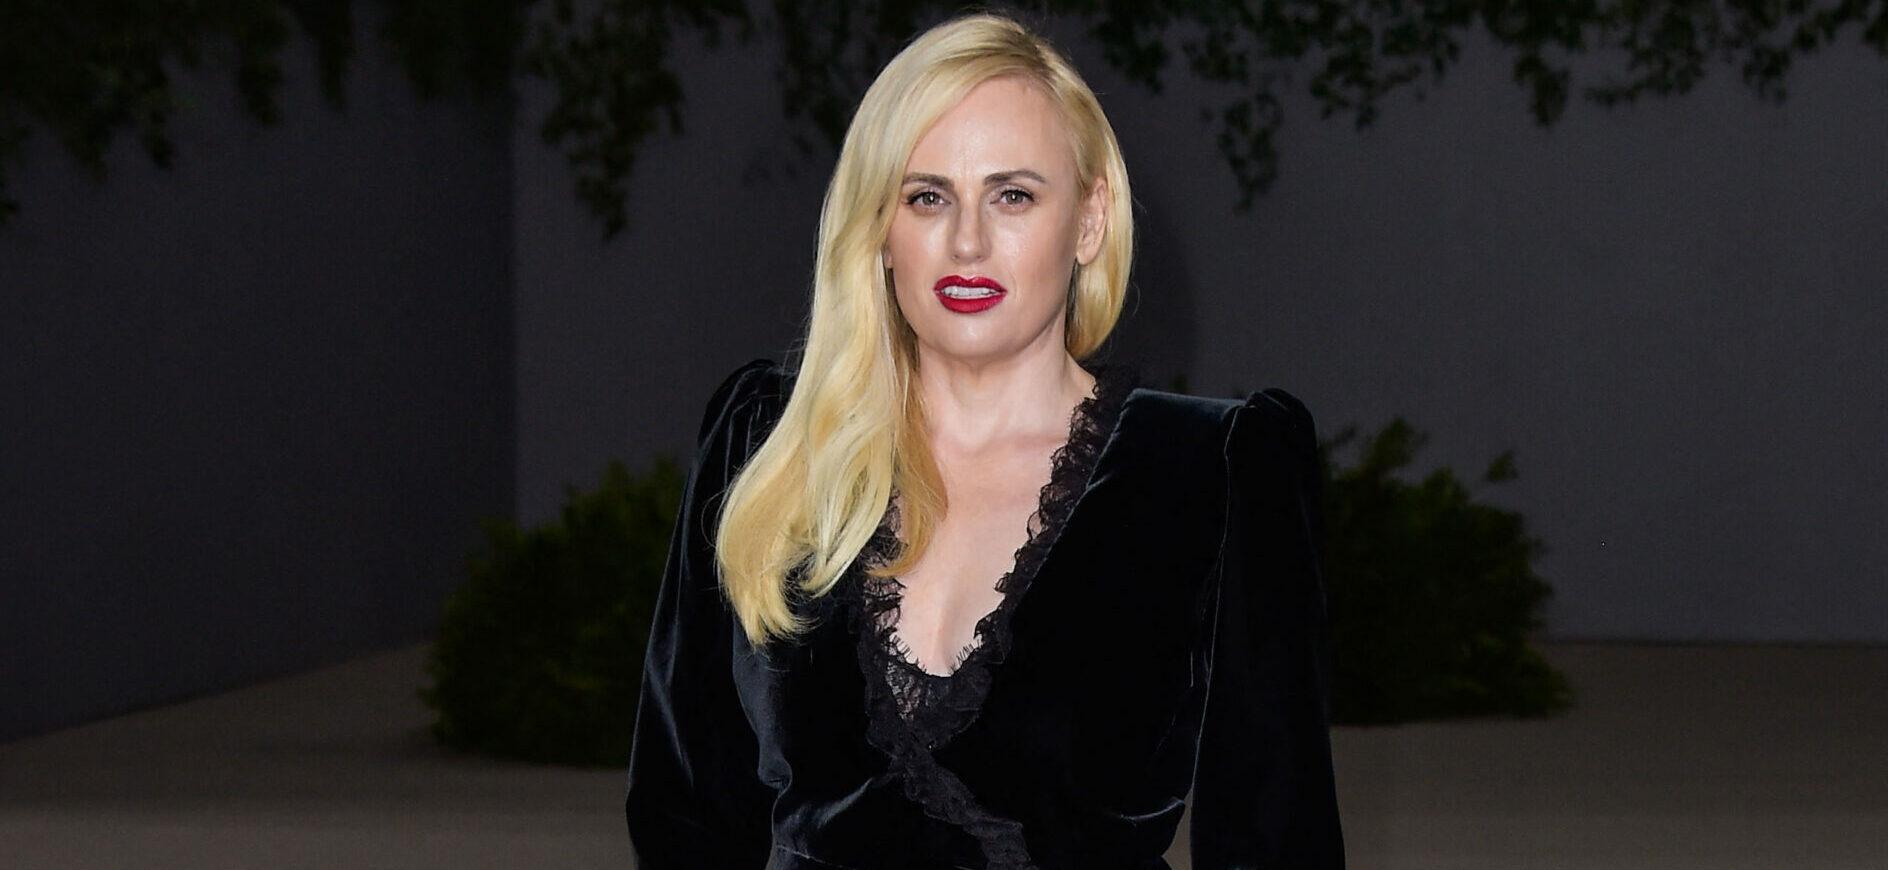 Rebel Wilson Drops Bombshell Allegation About A Member Of The Royal Family